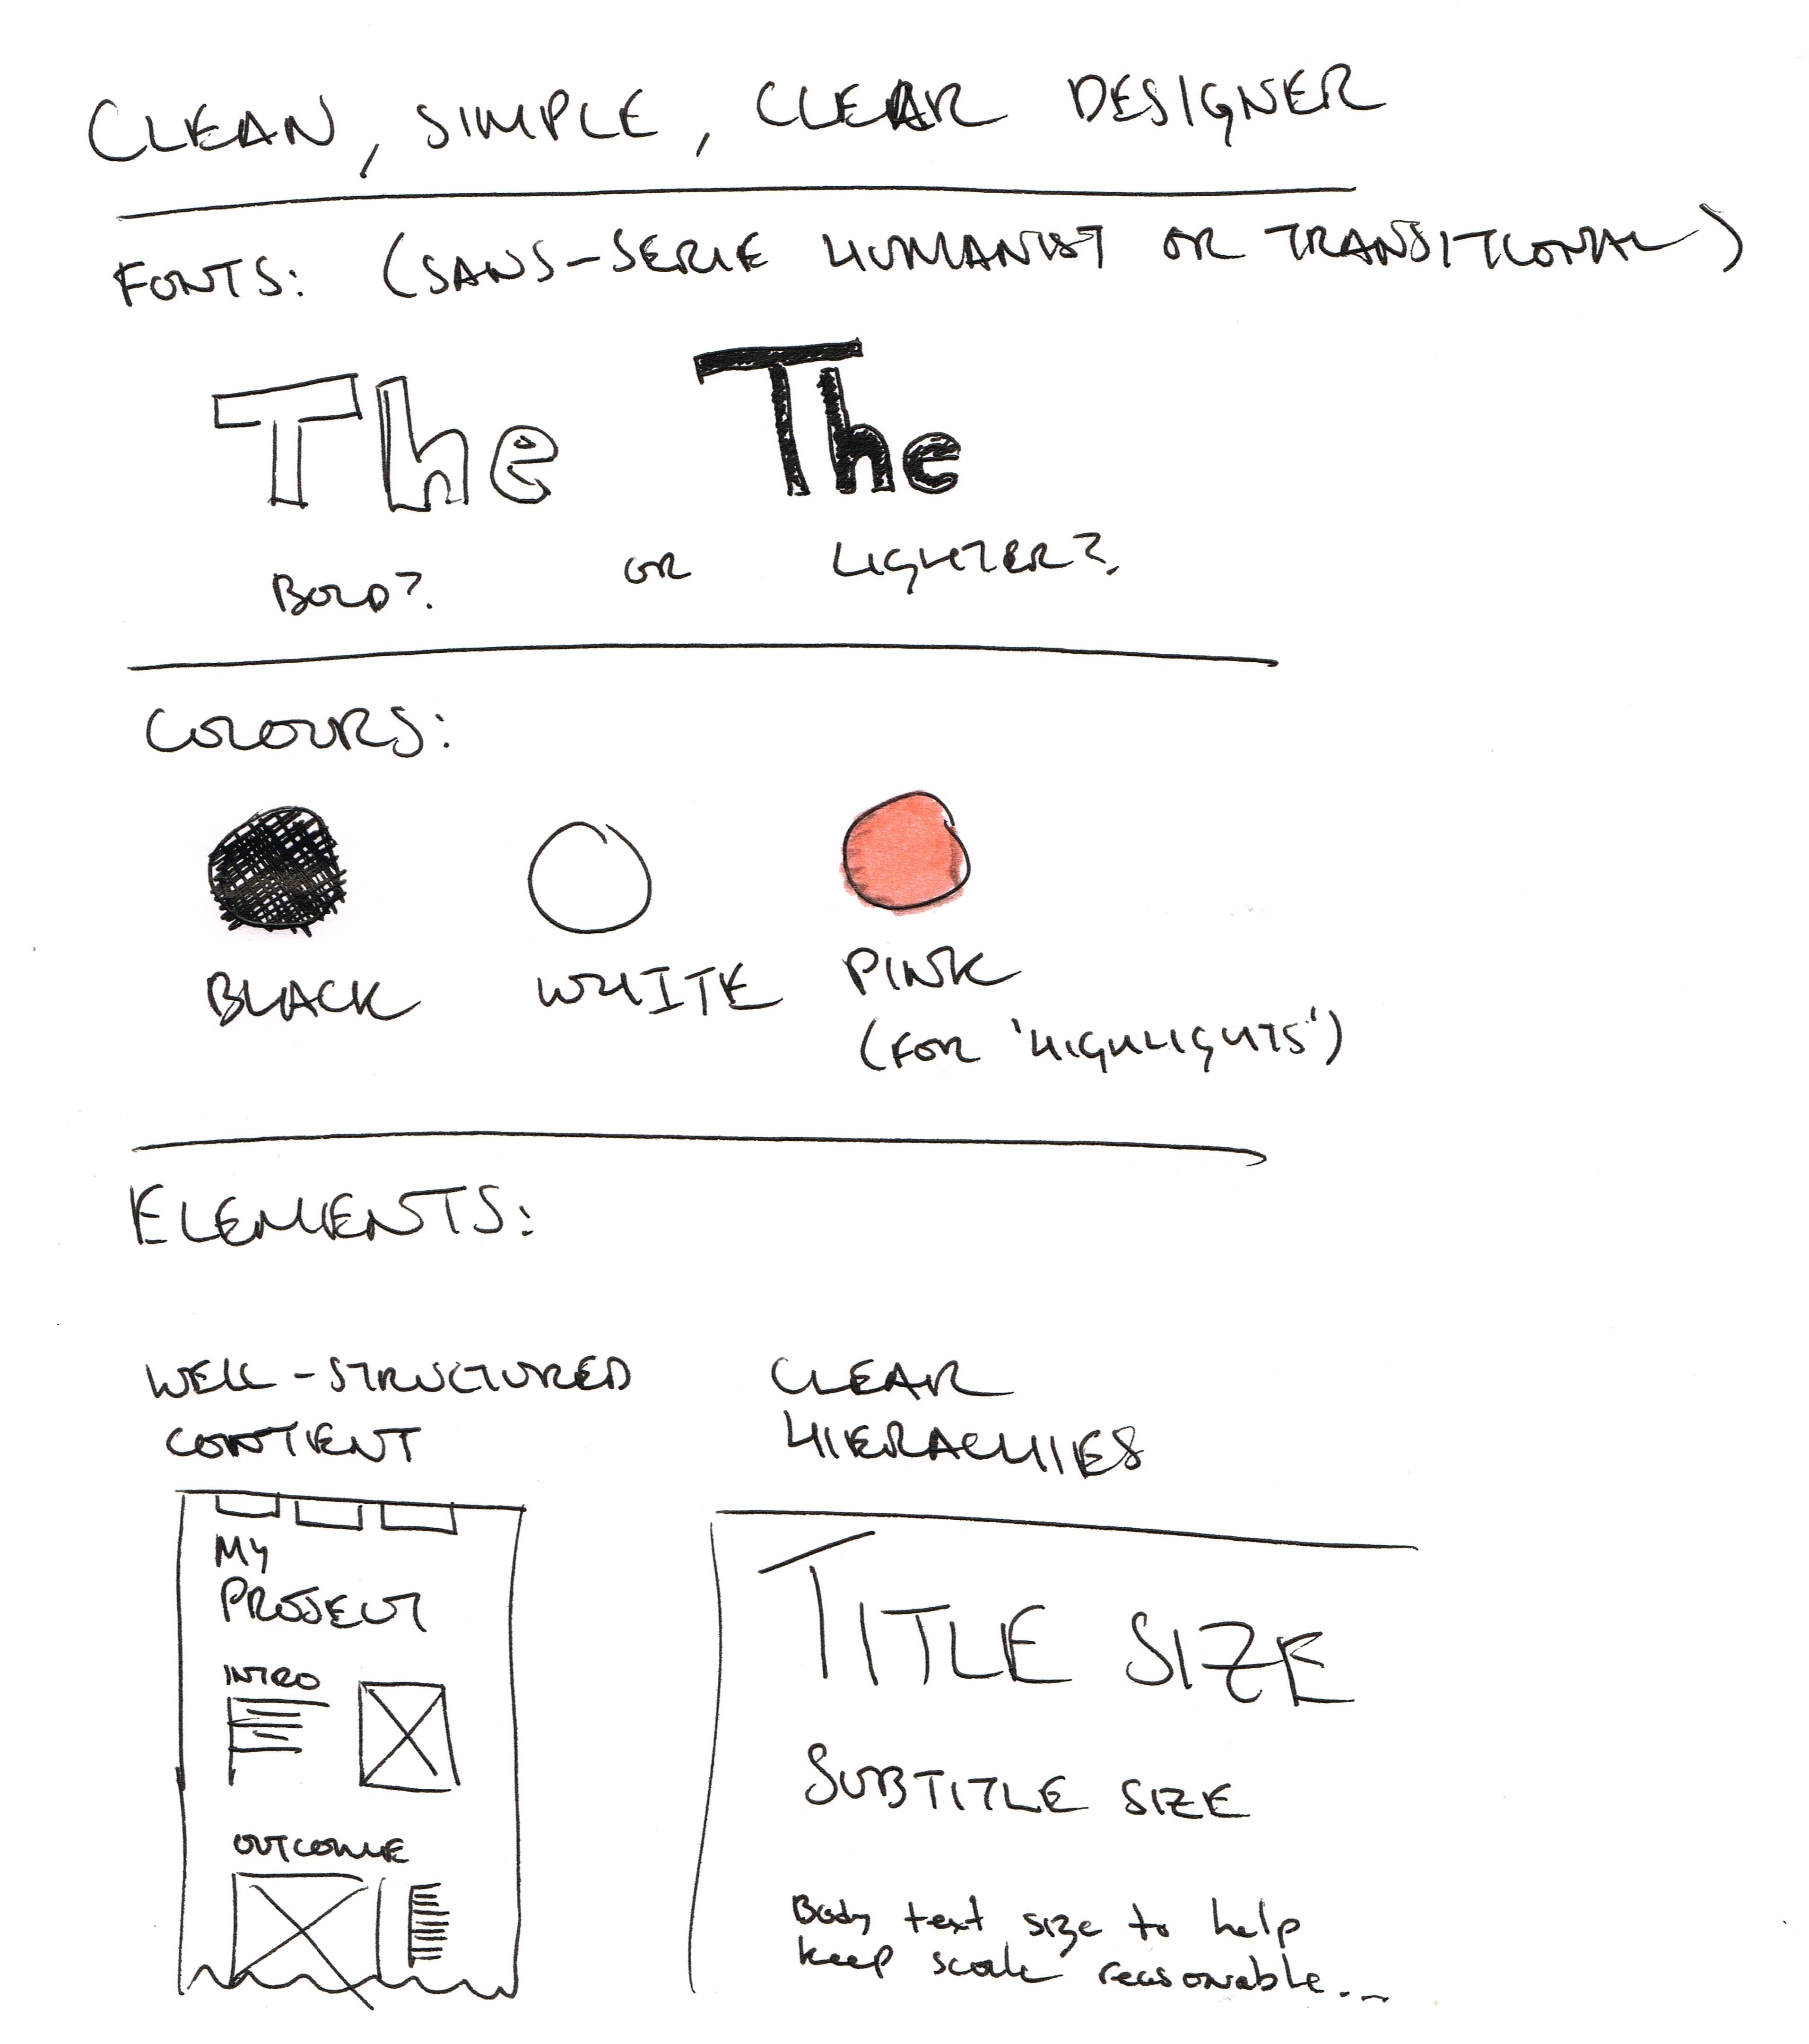 A sketch showcasing who the designer believes they are including, key terms, typefaces, colours, and structural or design elements